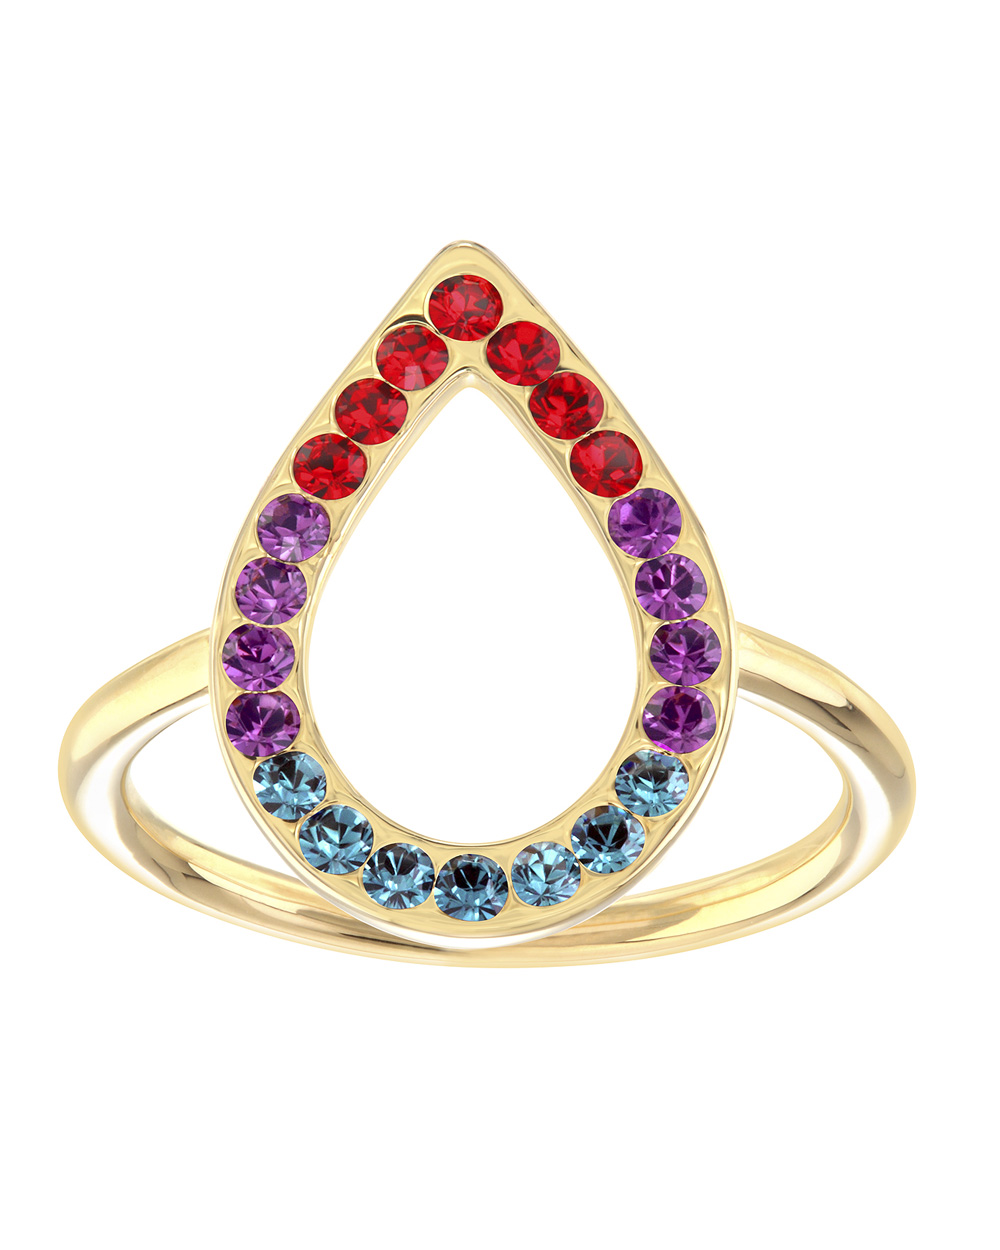 Ring, $59, by Lola and Grace.